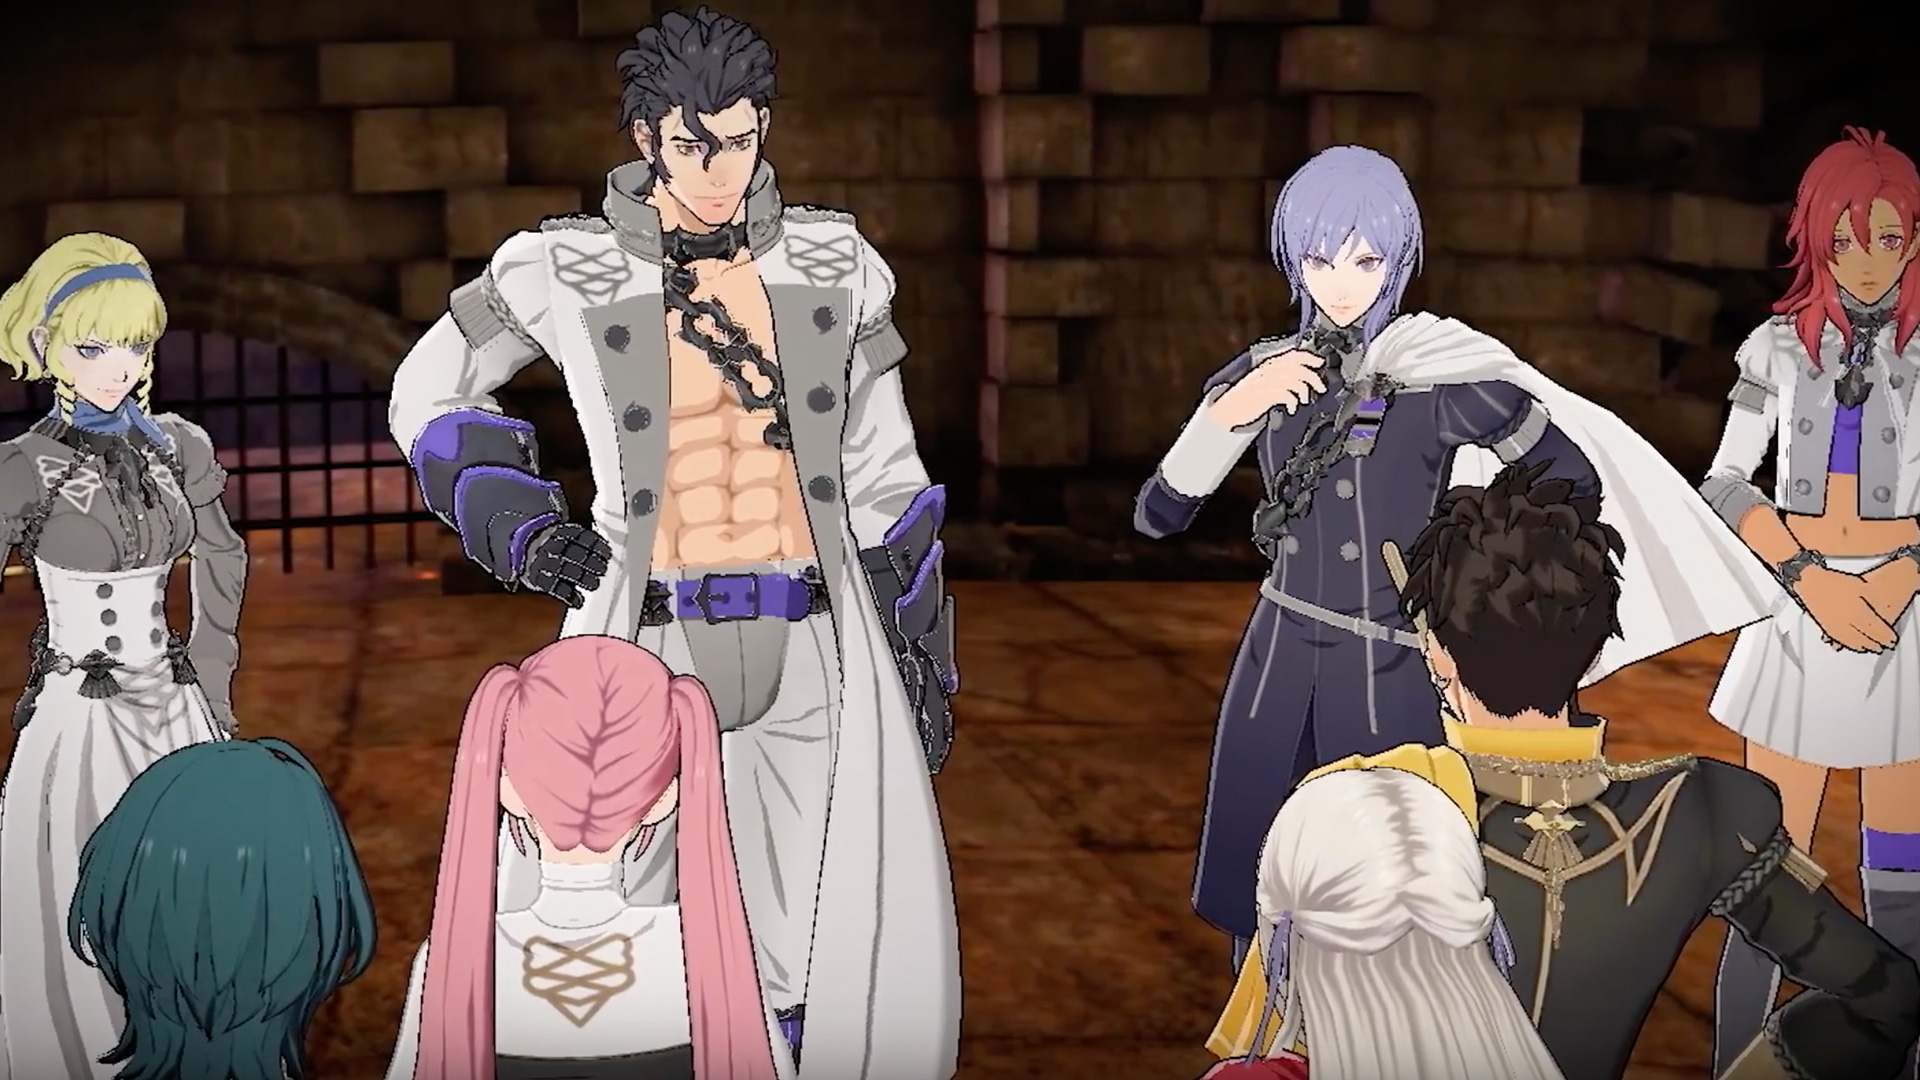 Fire Emblem: Three Houses reveals 'Cindered Shadows' side story D...